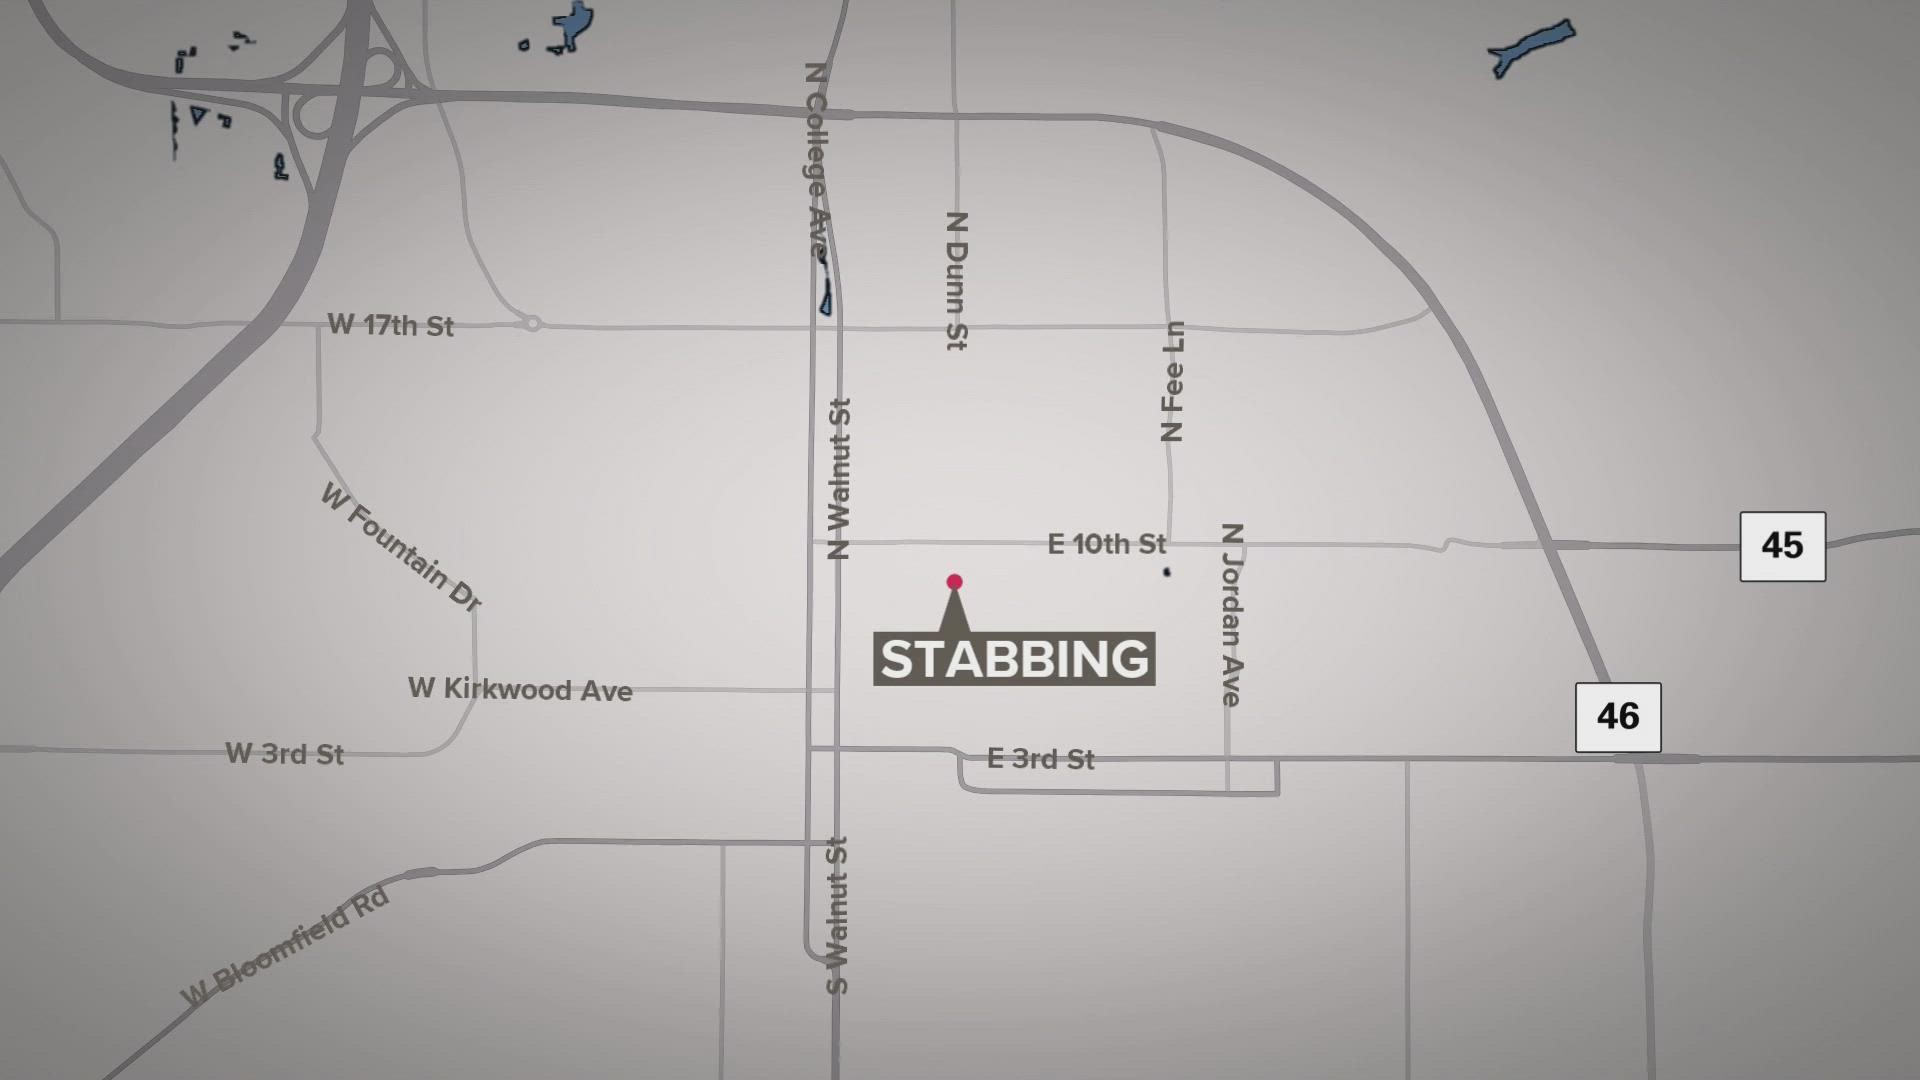 University police sent a campus alert about the stabbing reported near 9th and Dunn streets early Saturday morning.